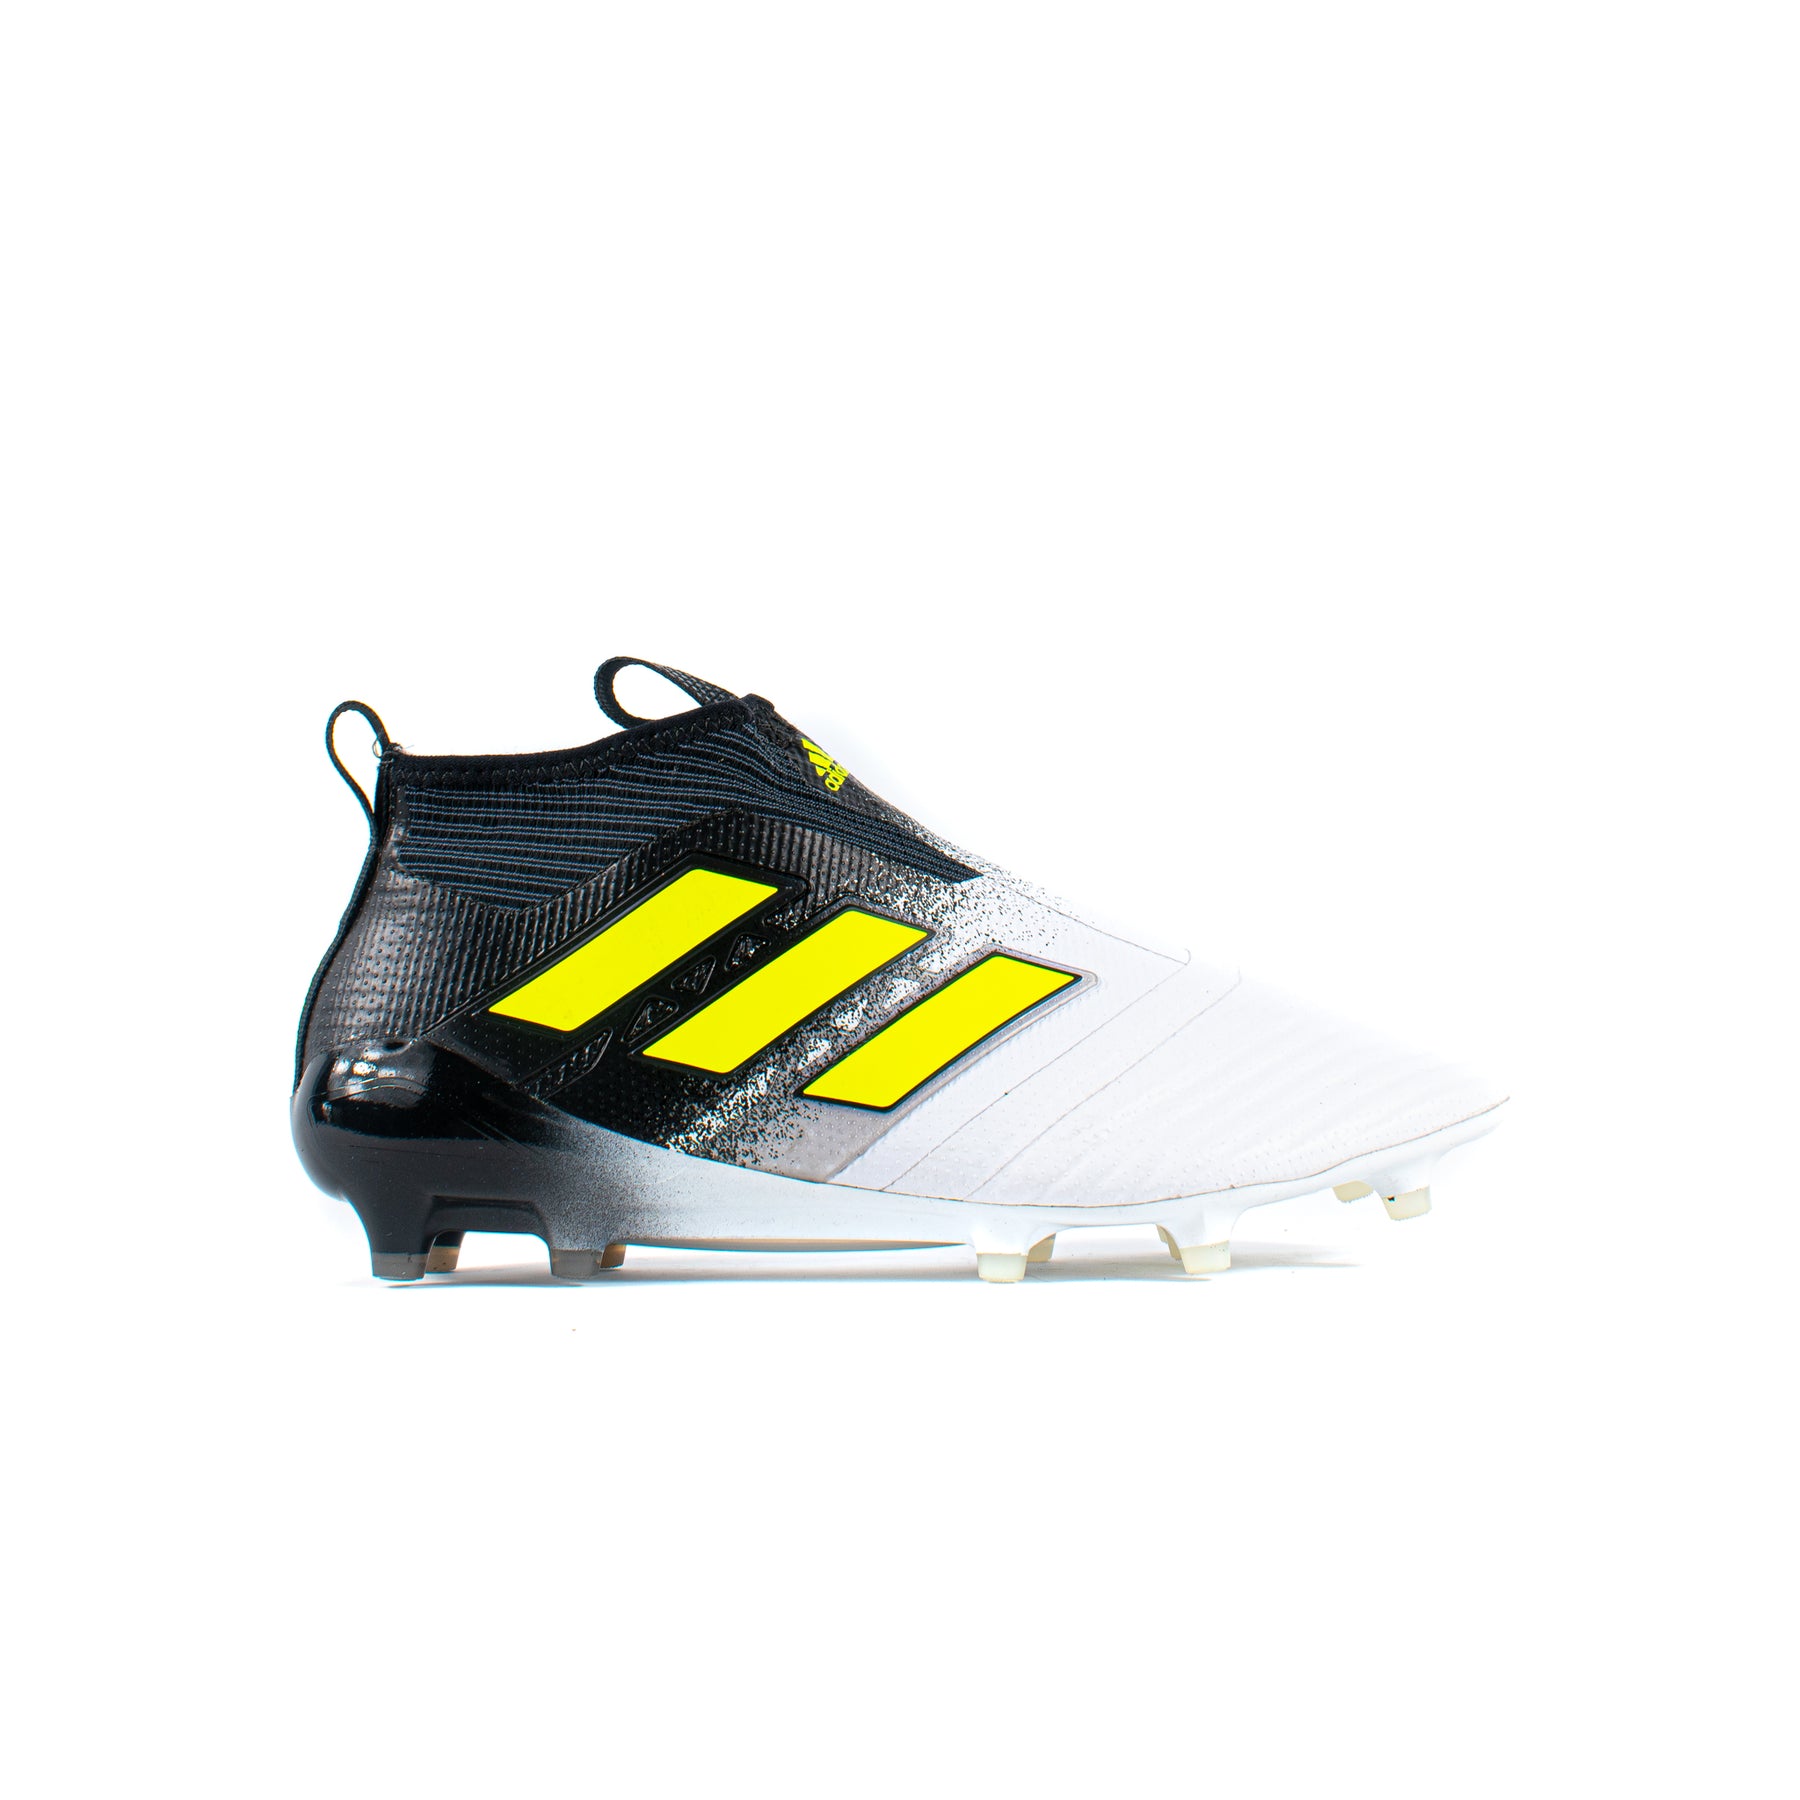 Adidas Ace 17+ PureControl White FG – Soccer Cleats